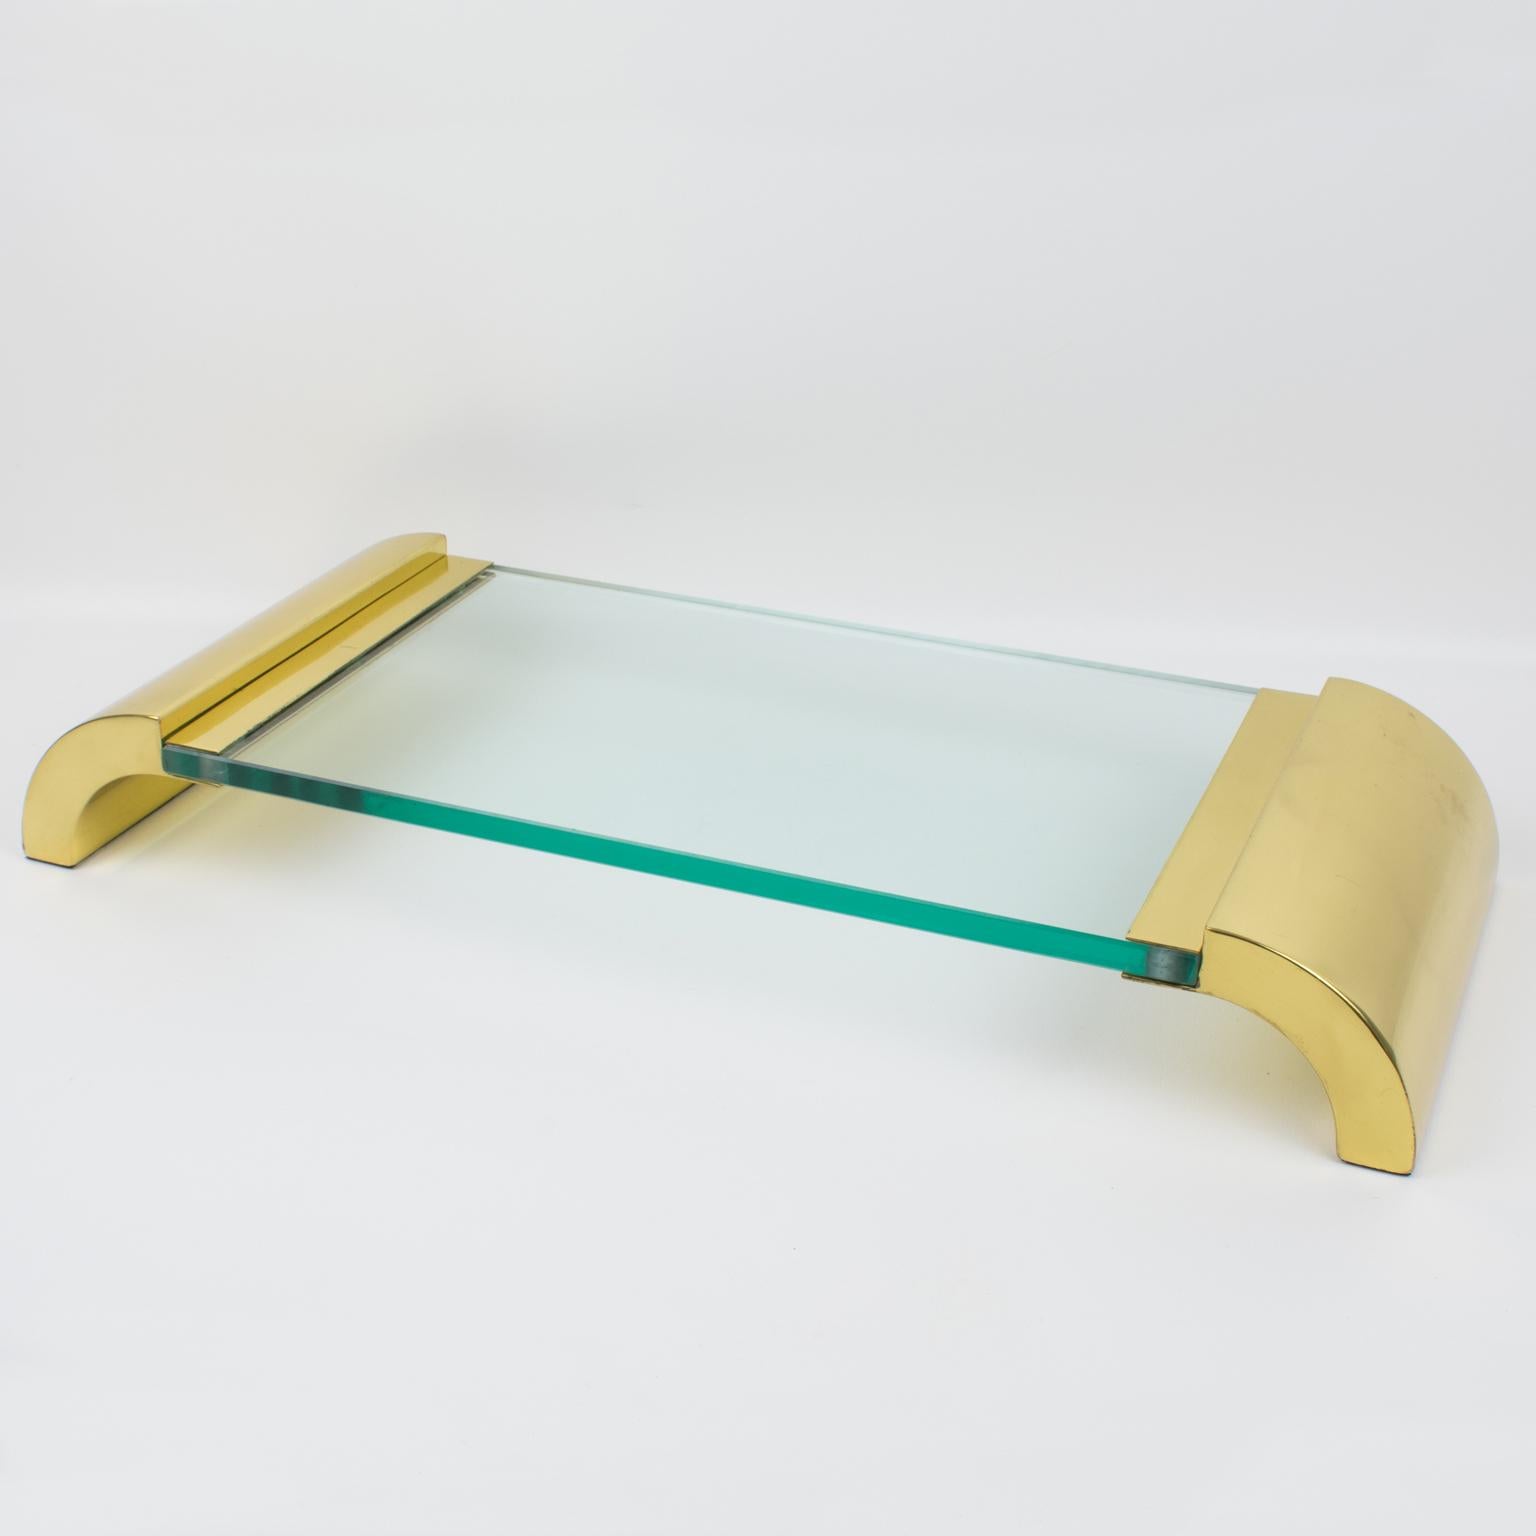 This lovely brass and glass pedestal centerpiece or display tray was designed in Italy in the 1980s. The serving piece has a modernist and minimalist design with massive polished brass raised sides, complemented with an extra thick glass slab. There